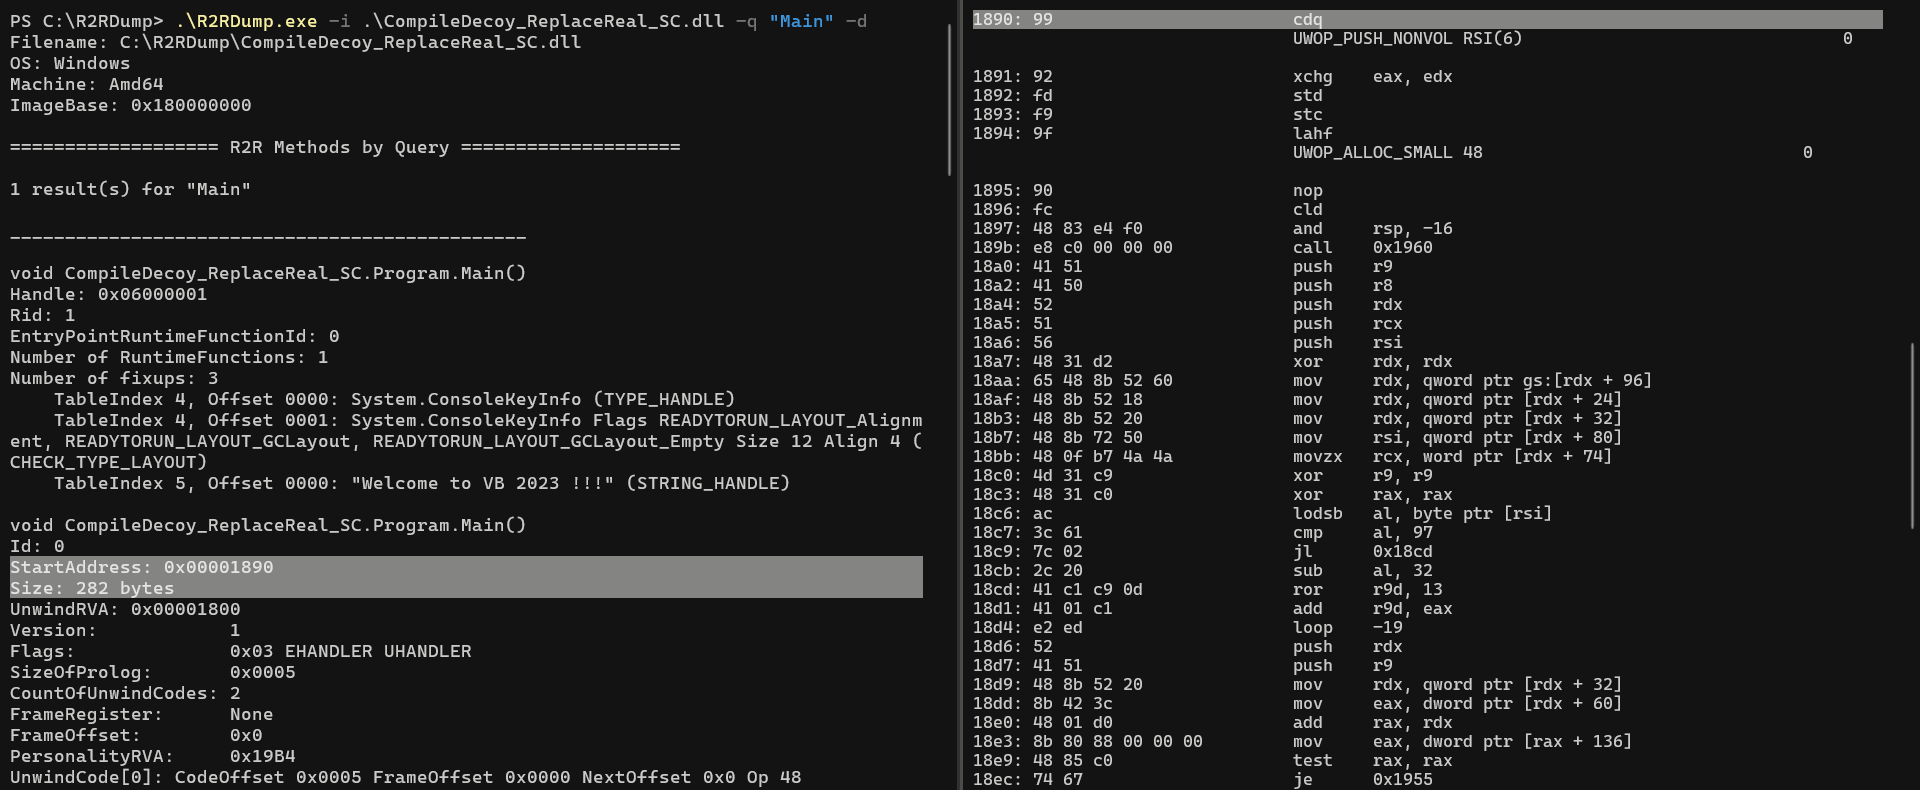 Figure 26: Using the R2RDump to show the disassembly of the method
“Main”